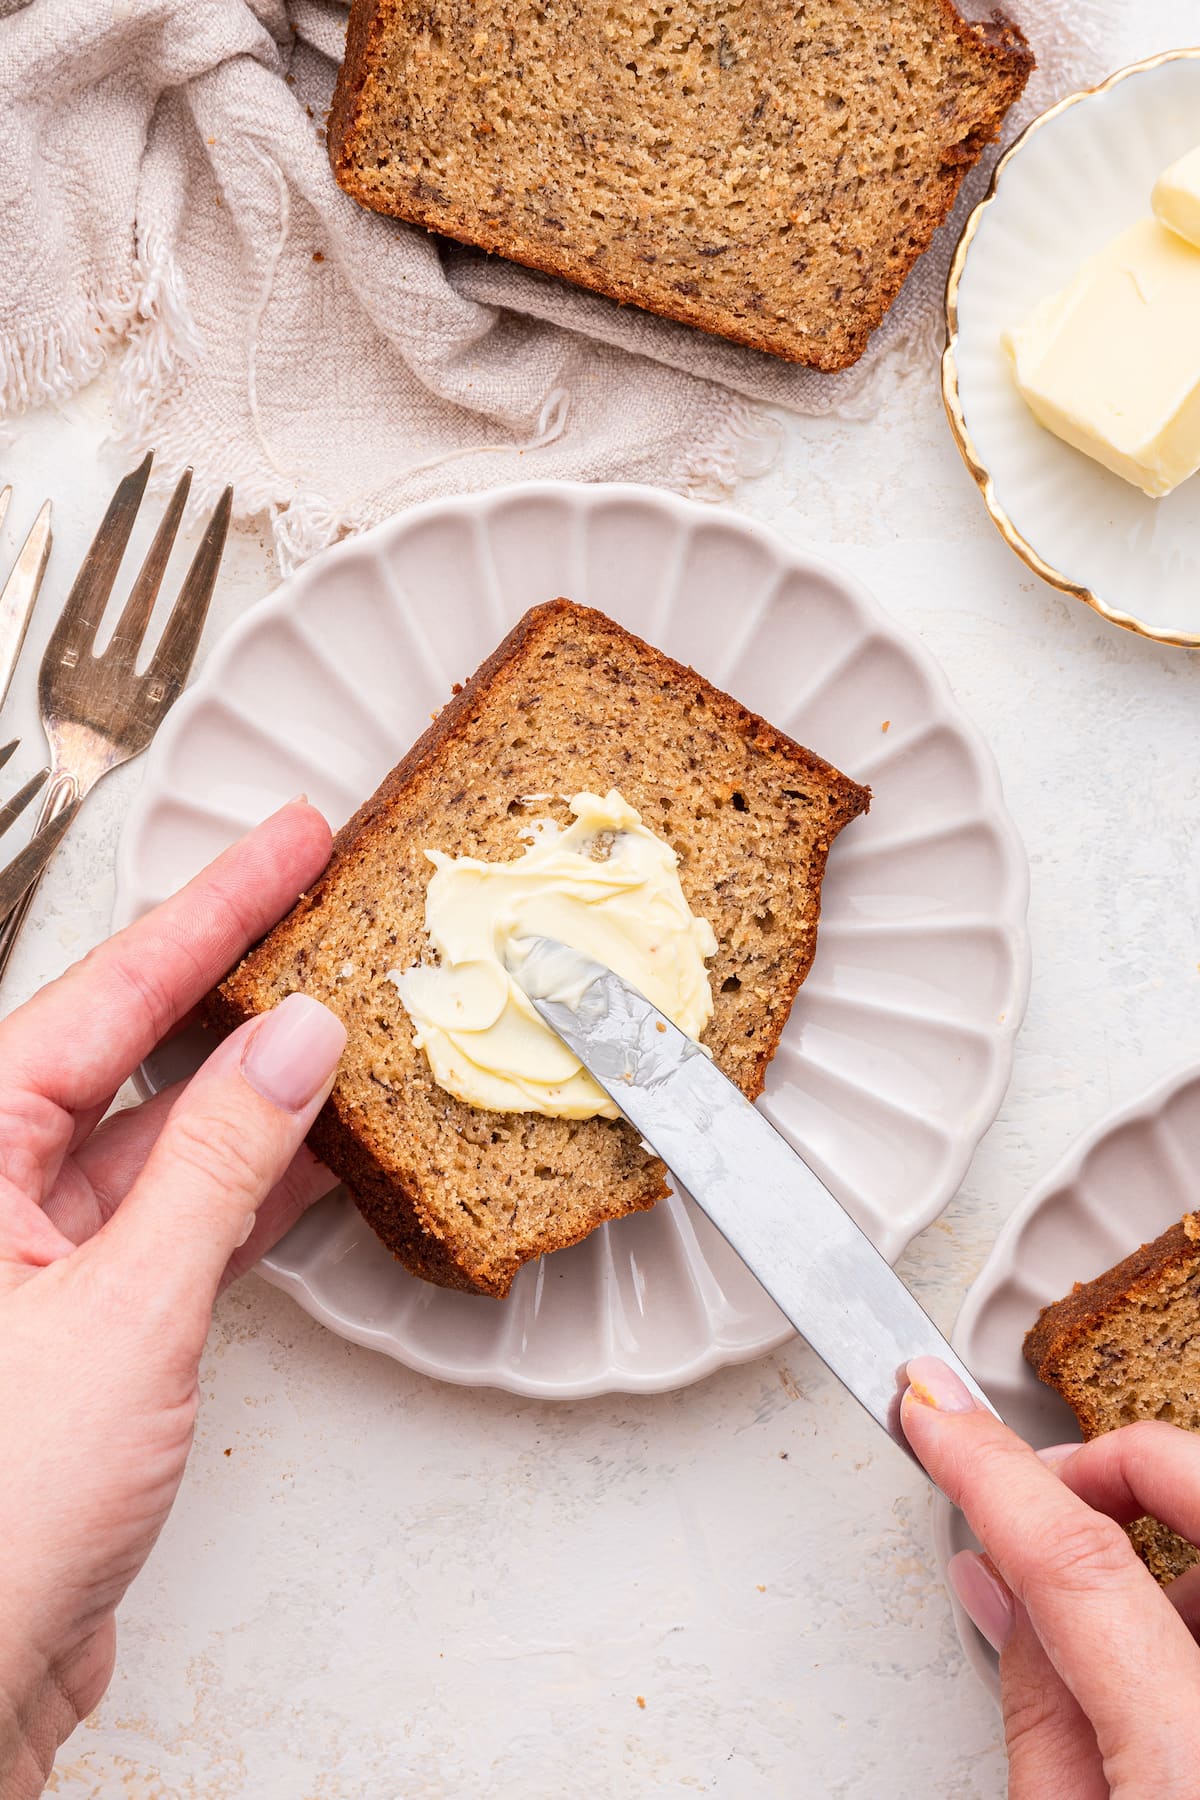 A woman uses a knife to spread butter on a slice of banana bread.